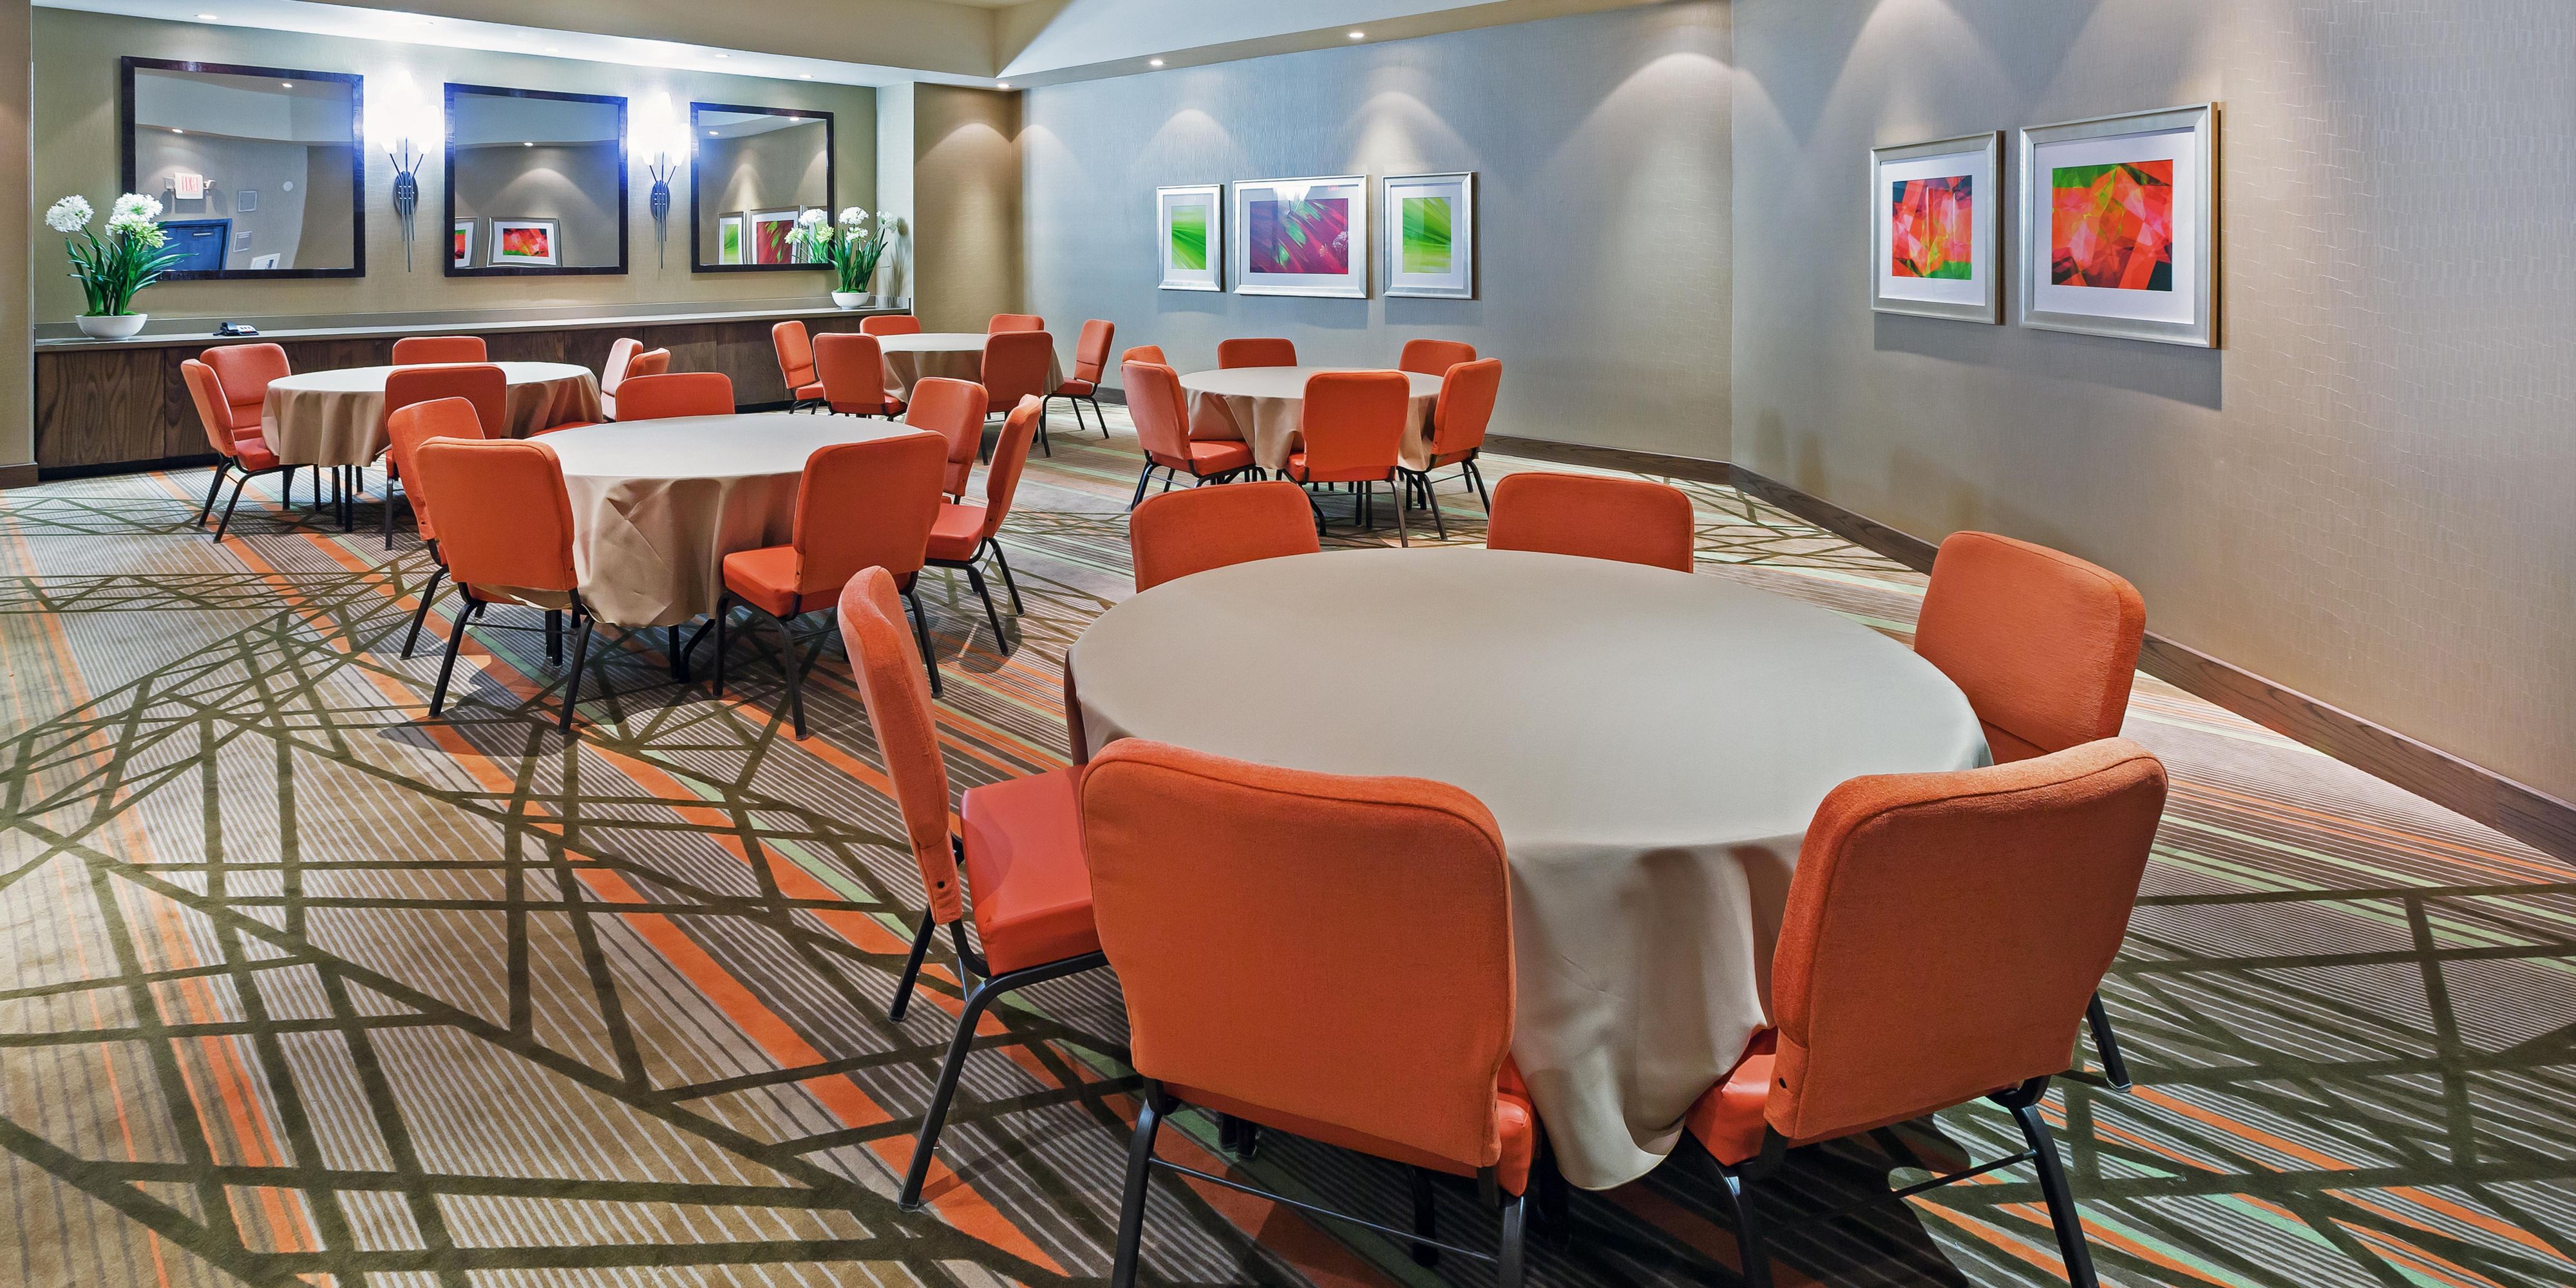 From sports teams to family reunions, we love a good gathering. Let us help with all the details, so you can get ready to play or get ready to celebrate!  With 3 meeting rooms our space is flexible and can also accommodate business meetings or corporate events for up to 60 people.